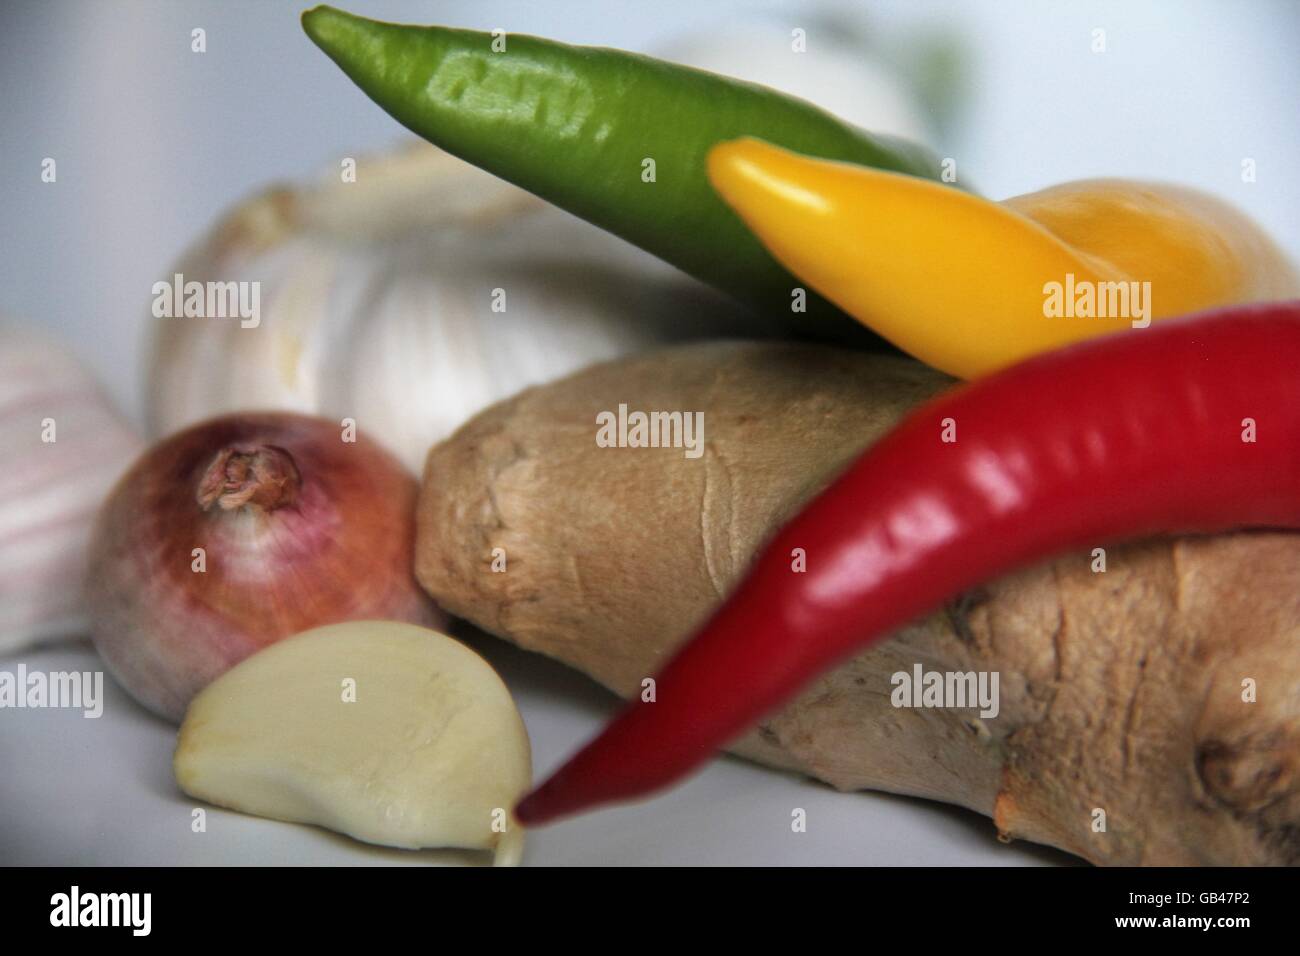 Fresh spicy Asian ingredients. Stock Photo